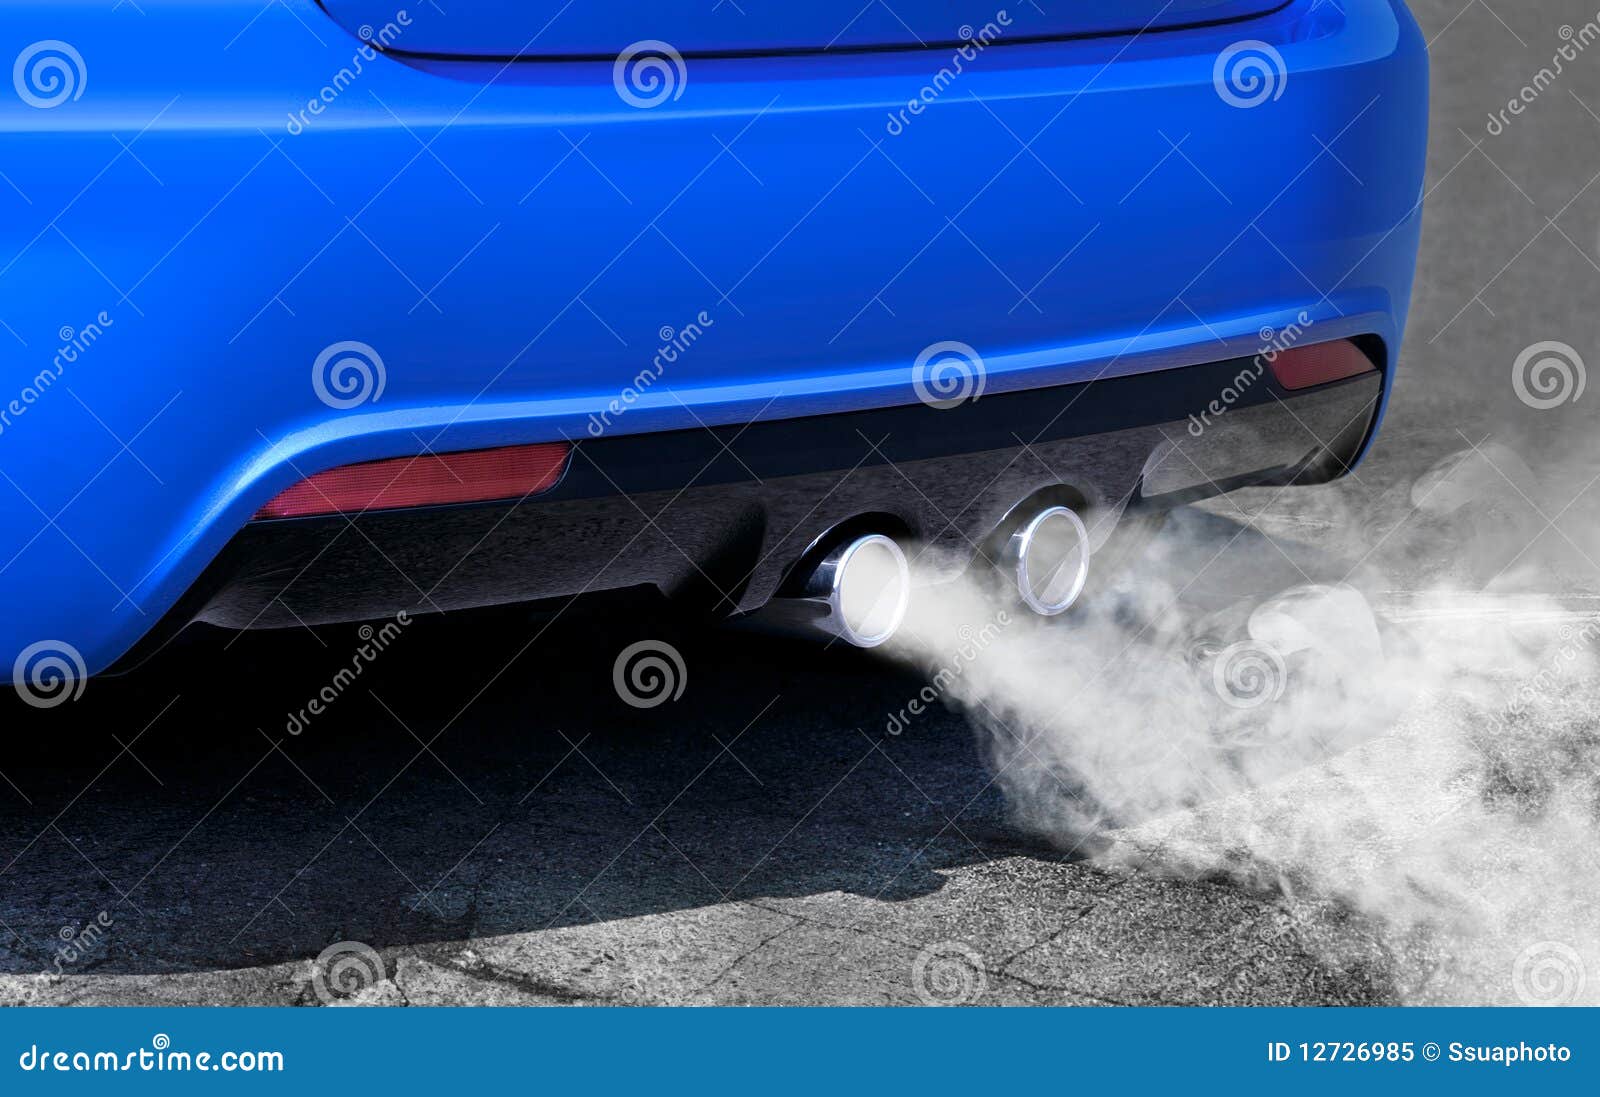 Pollution of Environment from Powerful Sport Car Stock Image - Image of ...